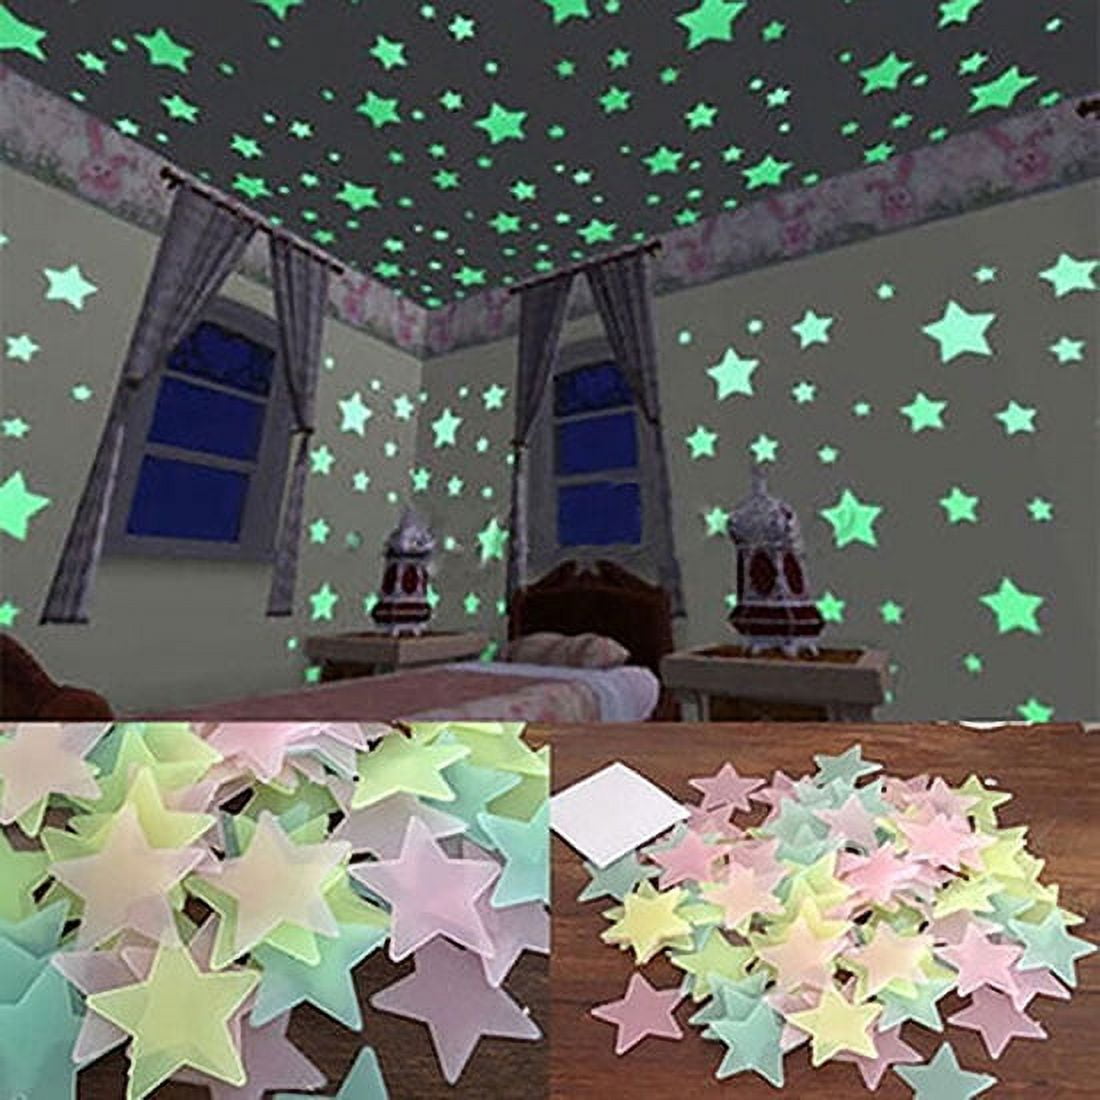 GUKKIE Glow in The Dark Stars for Ceiling, Wall Stickers 1049pcs Galaxy Star Set and Solar System Decal Bedroom,Play Room,Living Room,Wall